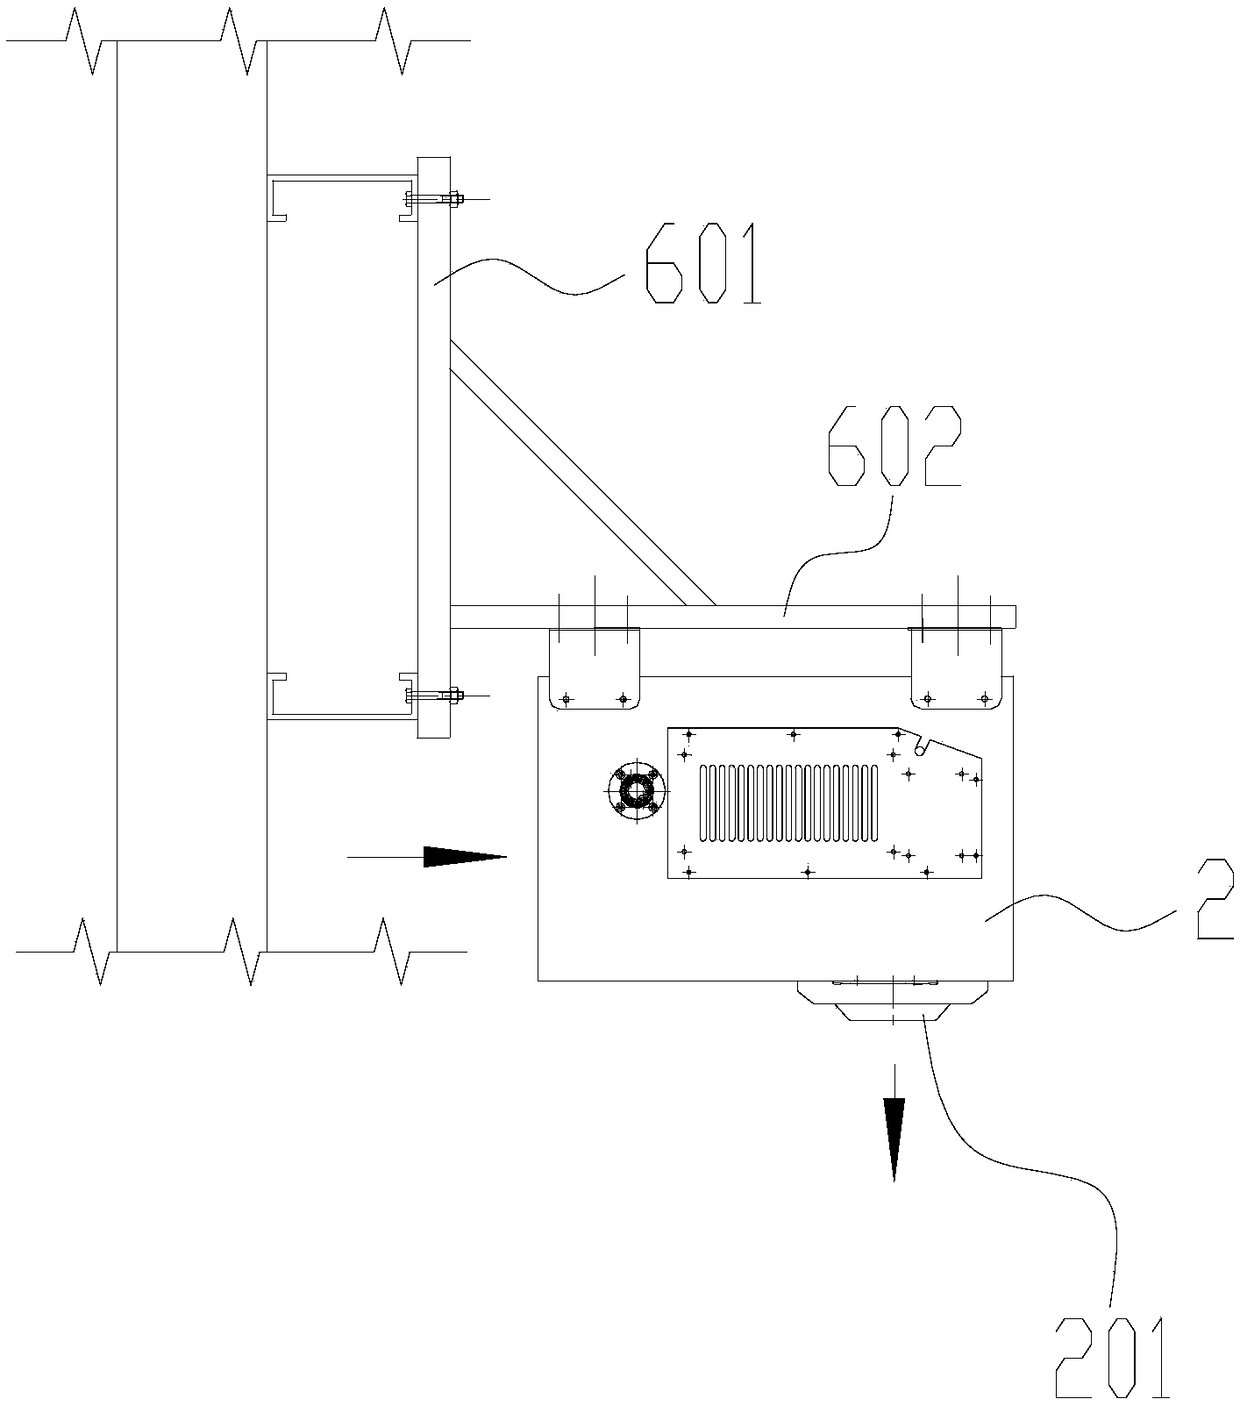 Heating system for tall building internal space